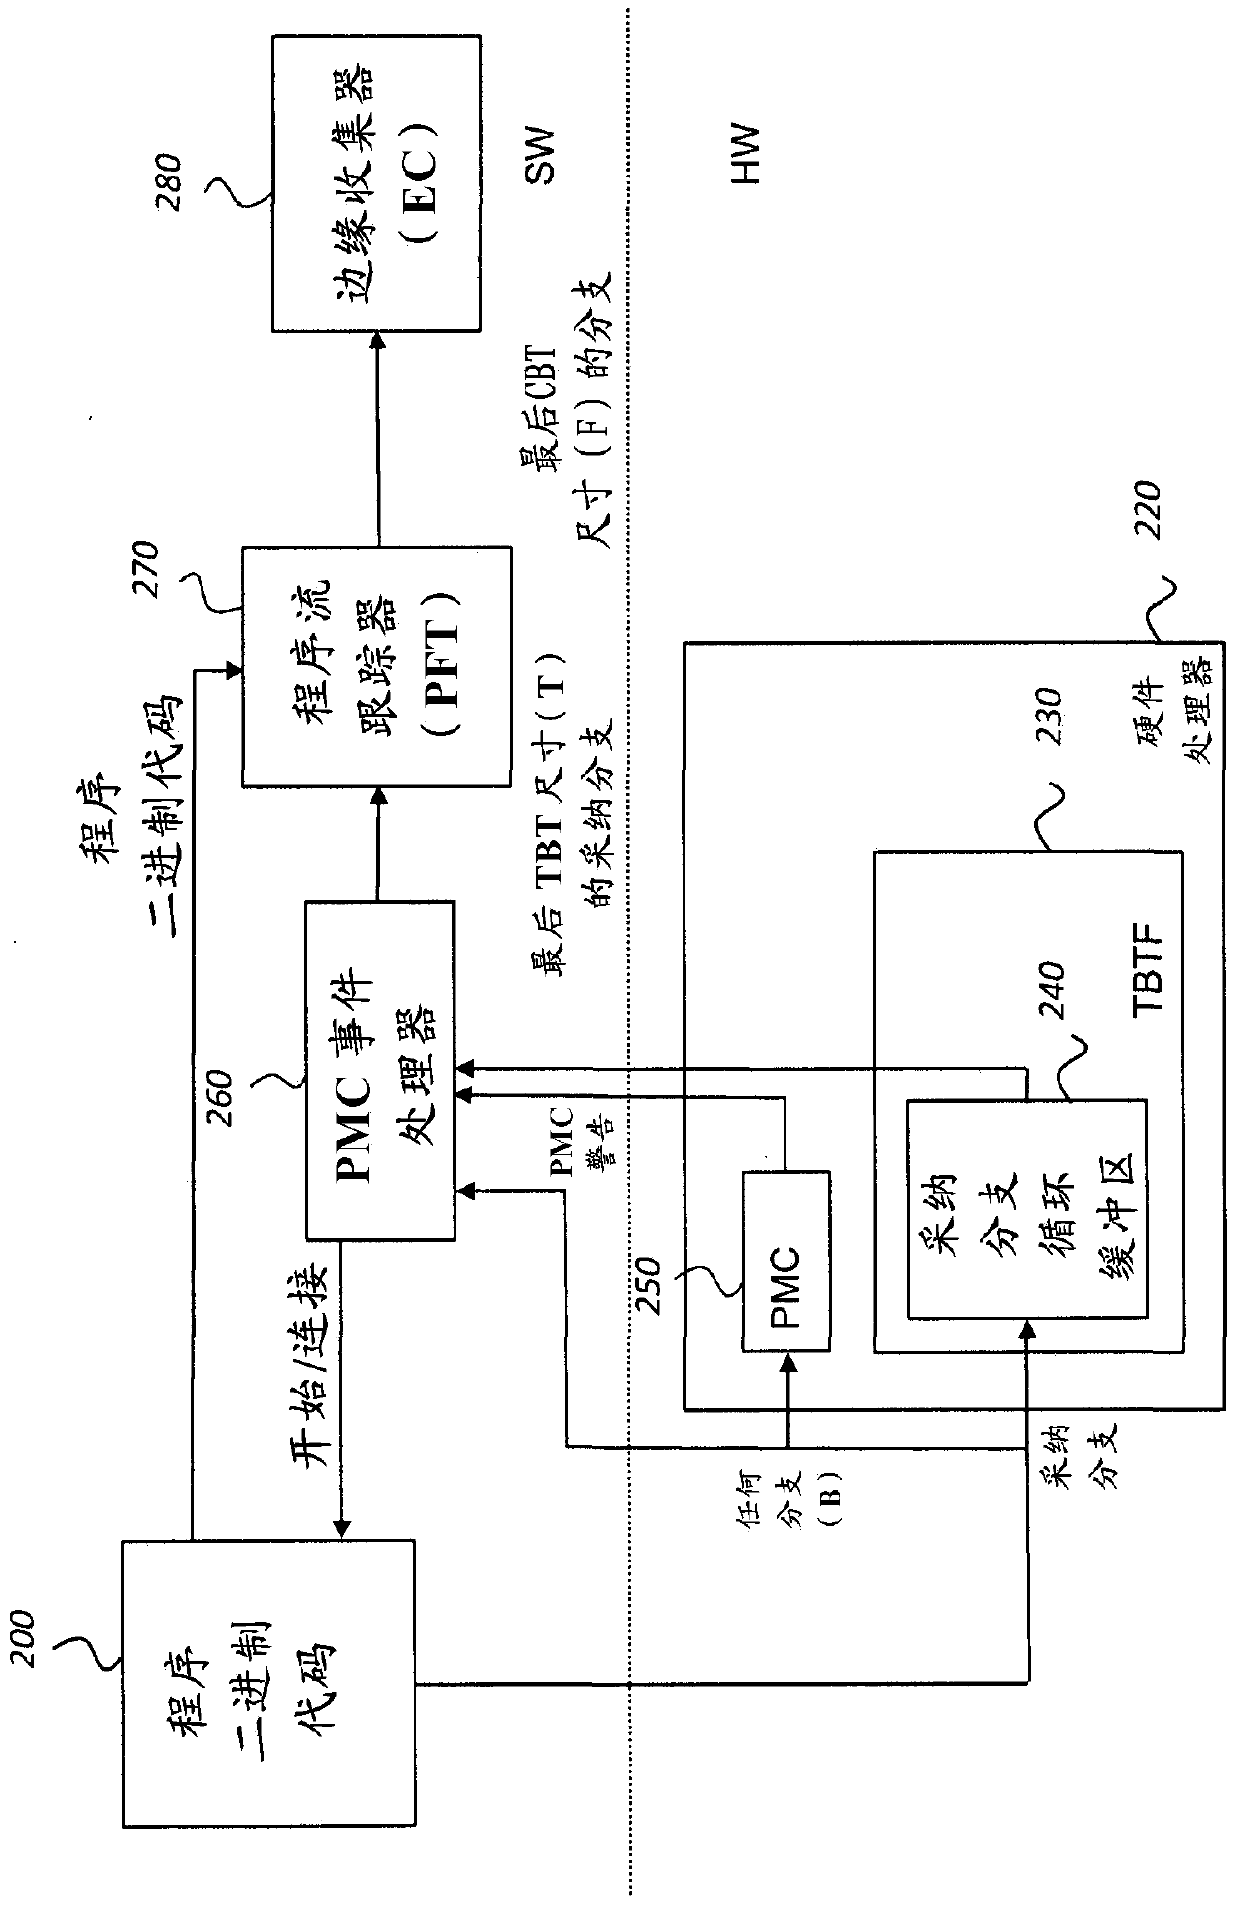 Method and system for hardware-based edge profiling